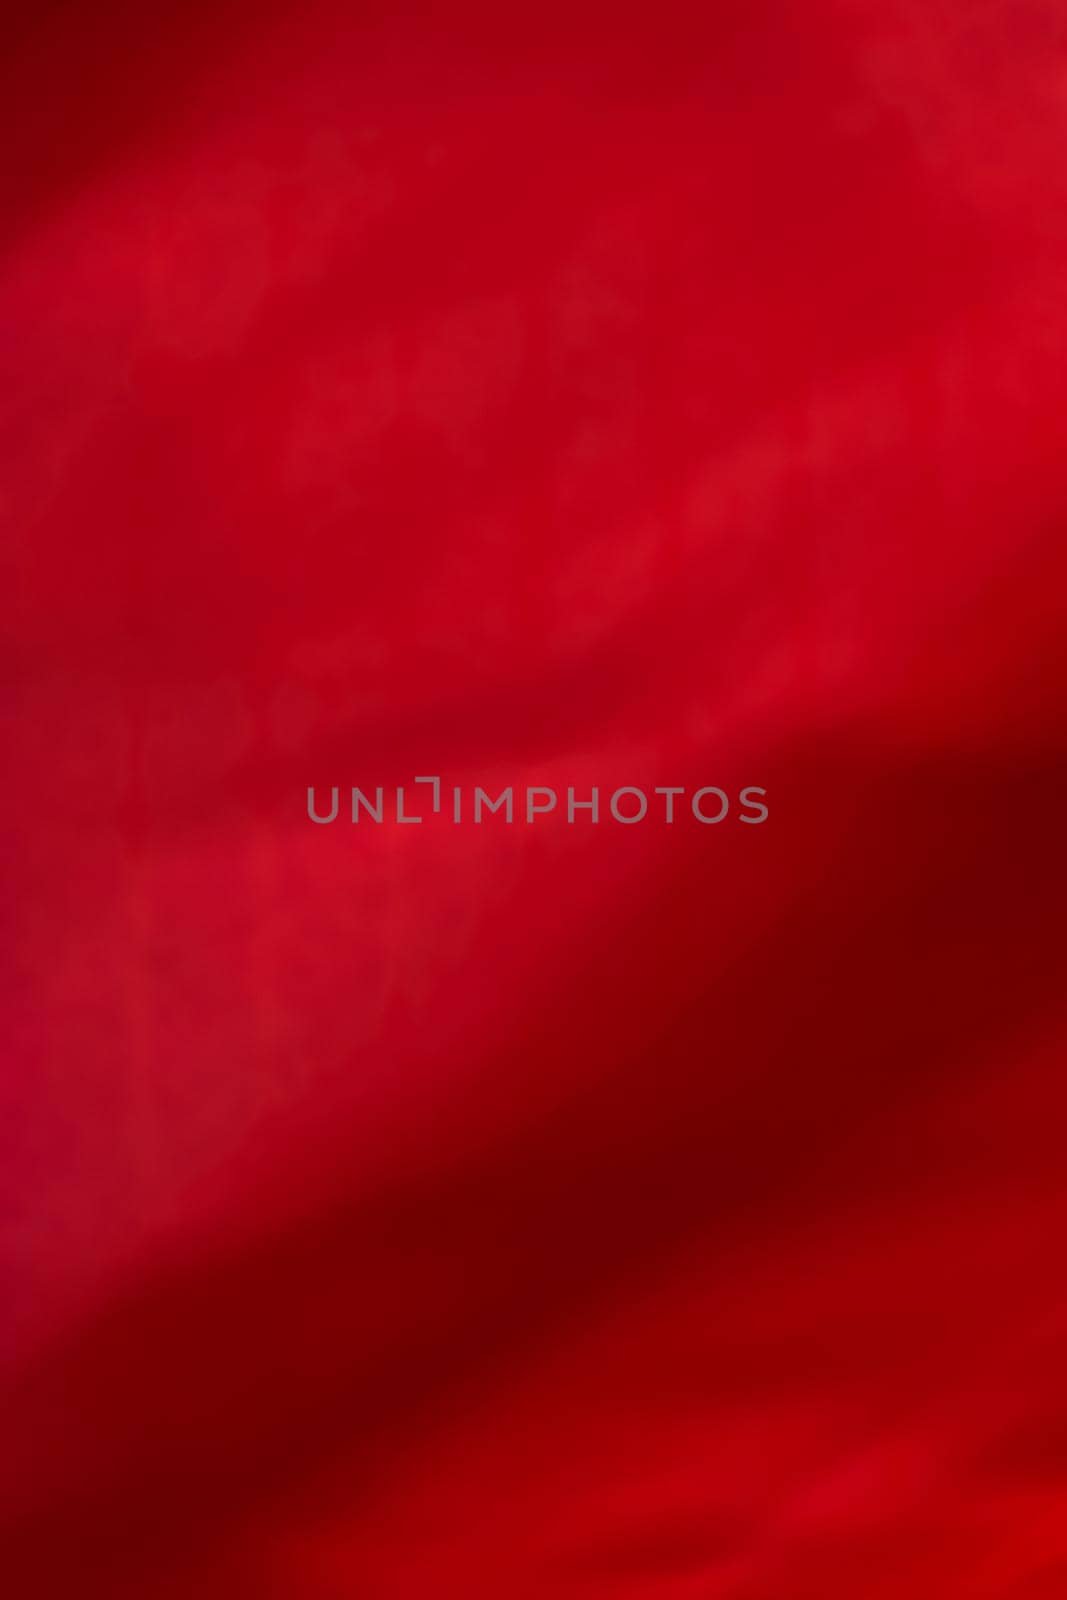 Holiday branding, beauty glamour and love backgrounds concept - Red abstract art background, silk texture and wave lines in motion for classic luxury design